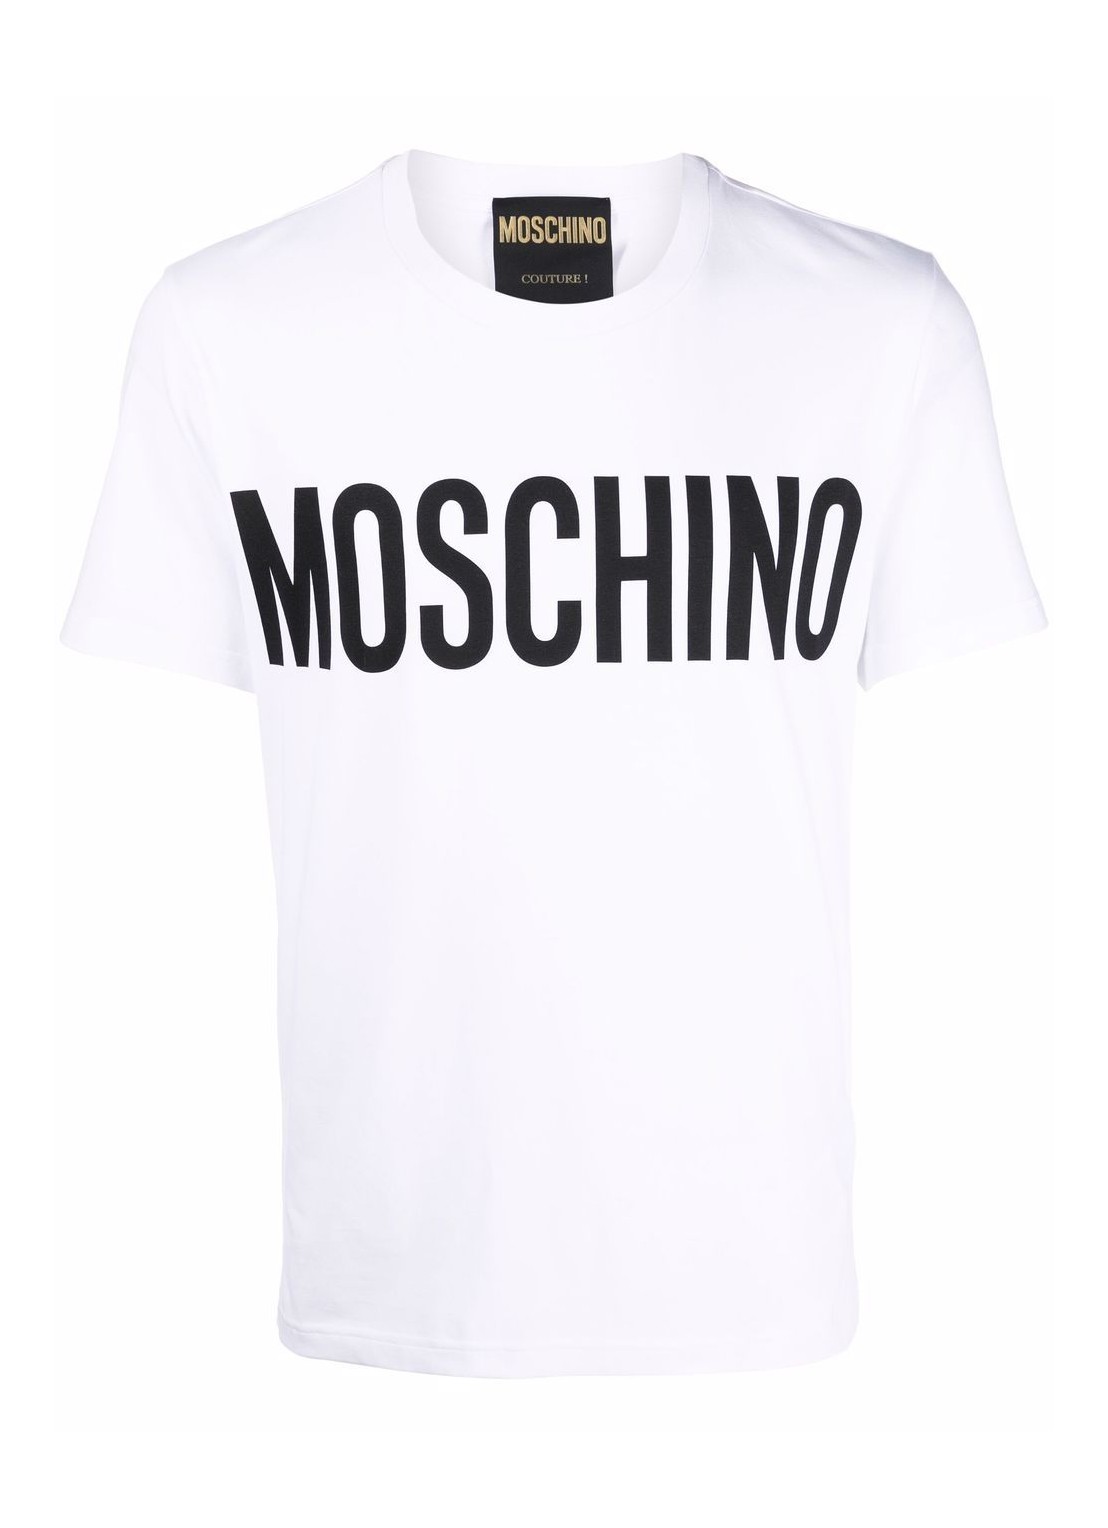 Camiseta moschino couture t-shirt manstretch cotton jersey - 07022039 a1001 talla 52
 